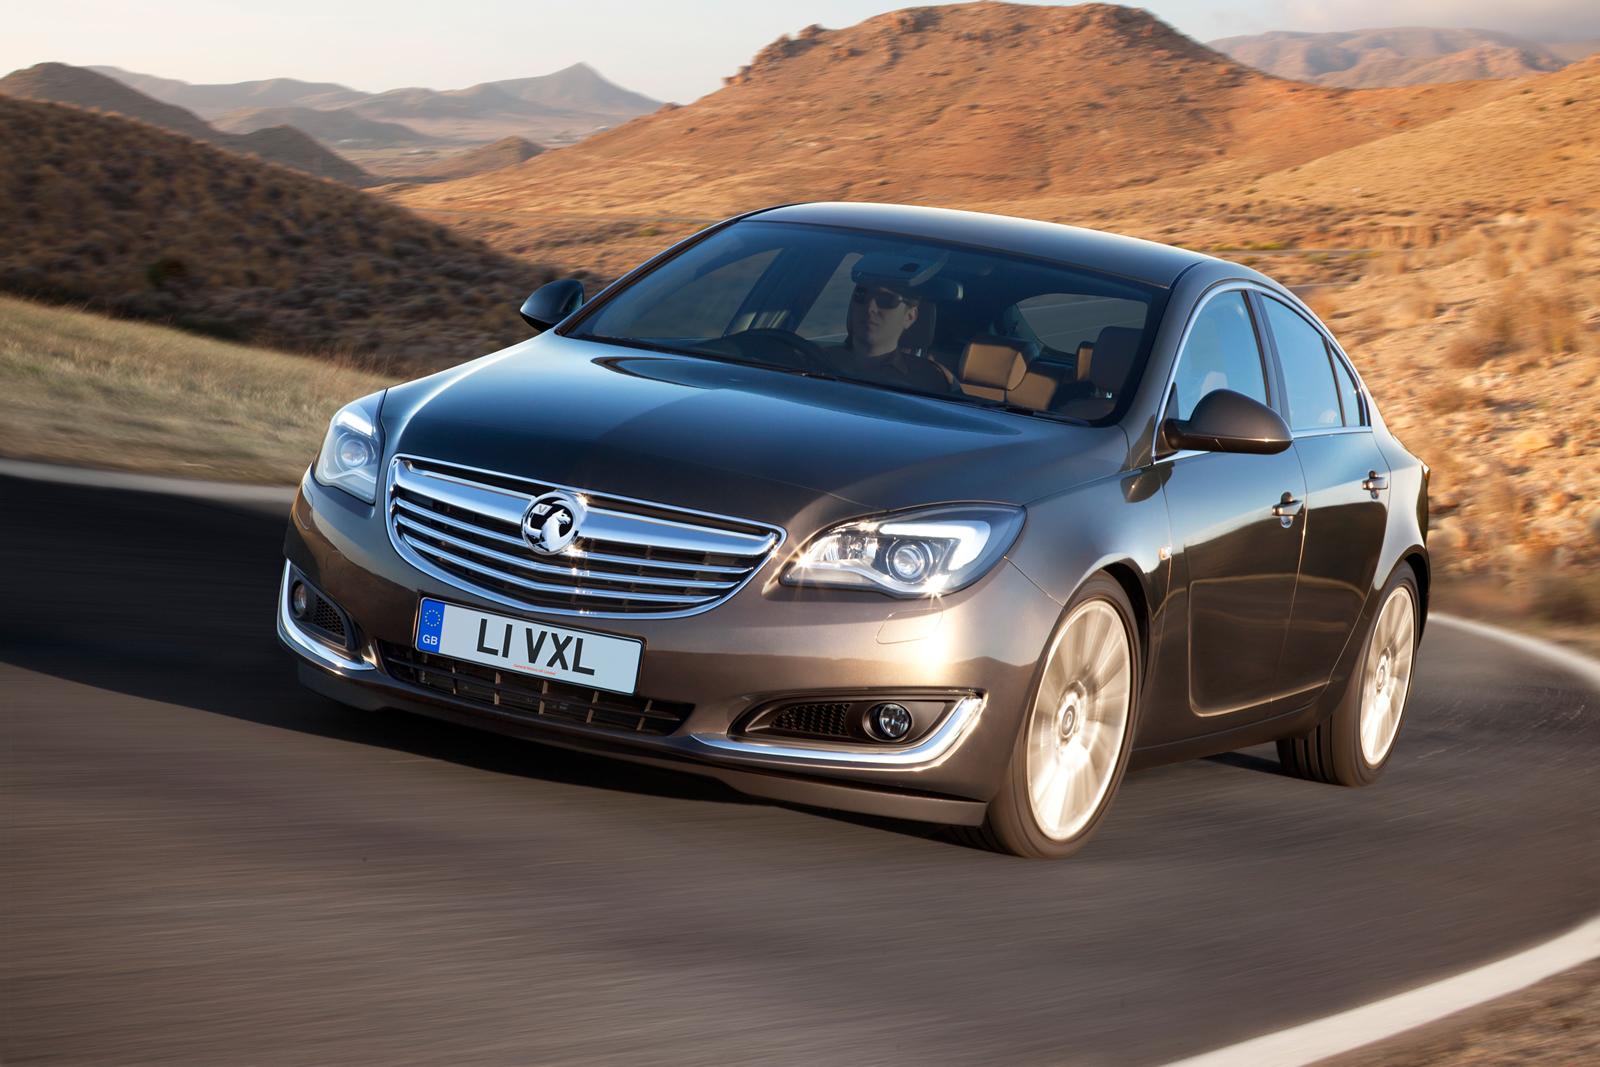 2014 Opel Insignia revealed, revised interior and exterior